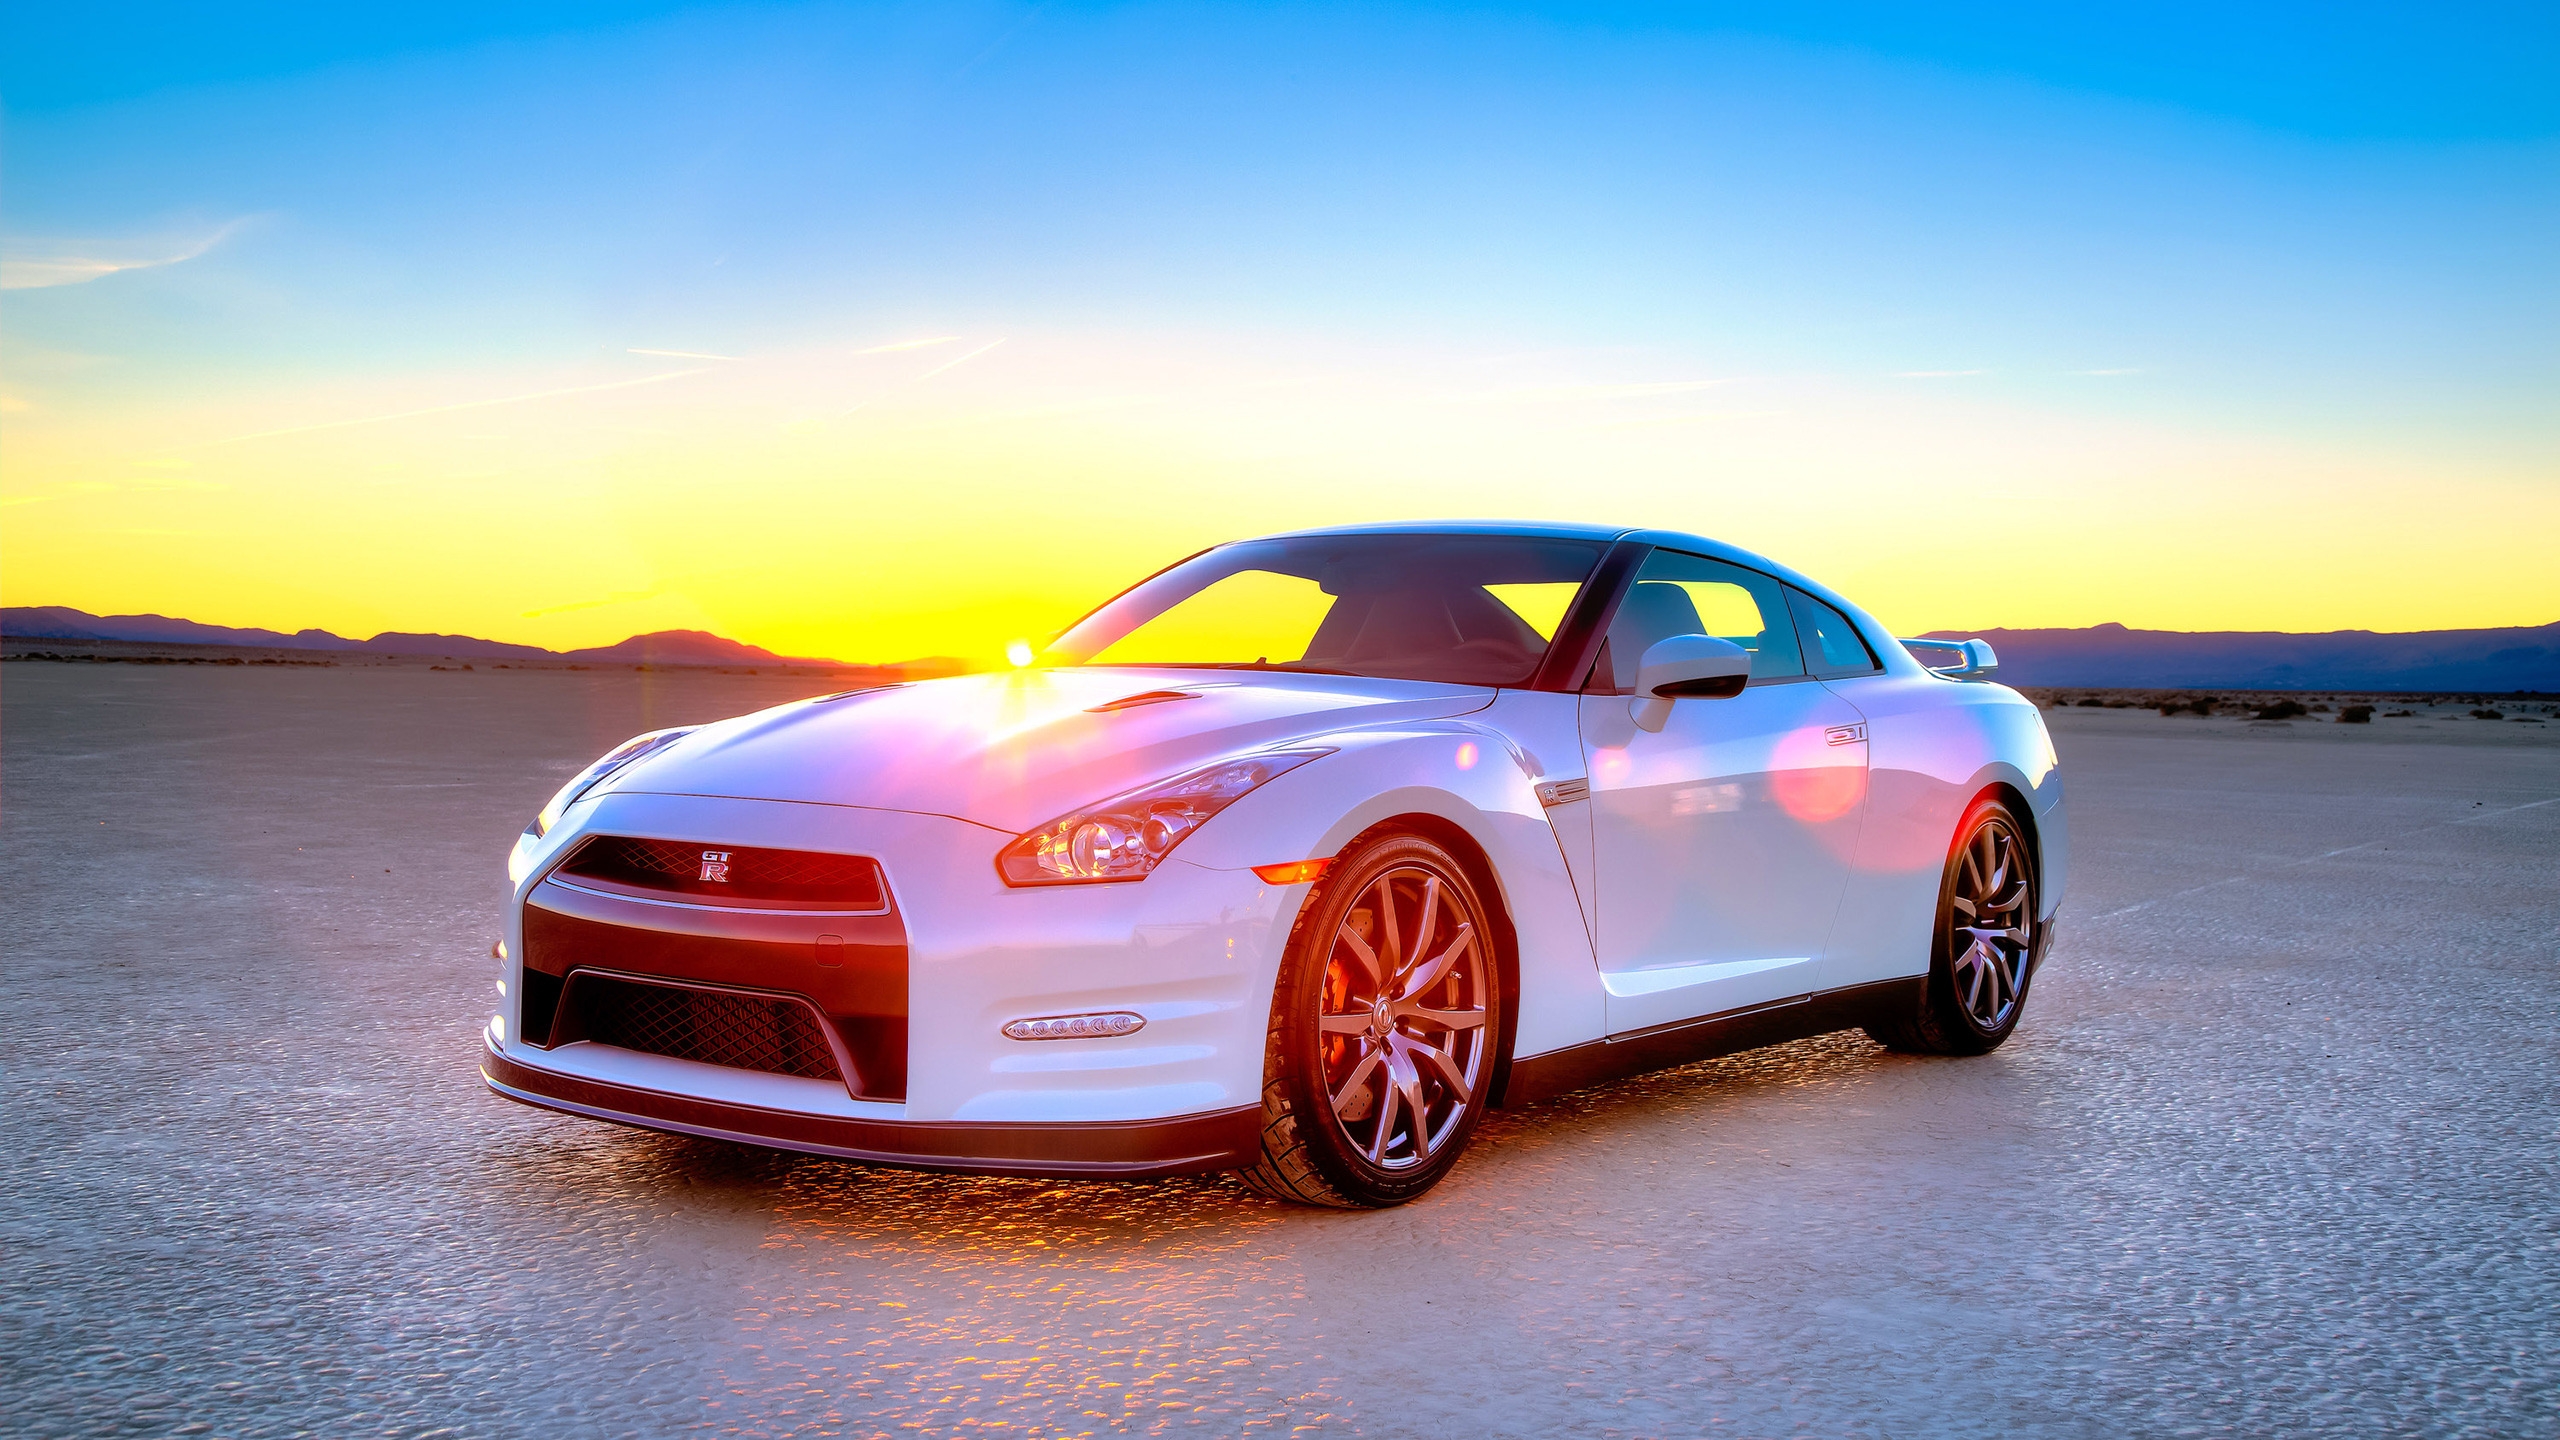 White Nissan GT-R 2014 Edition for 2560x1440 HDTV resolution